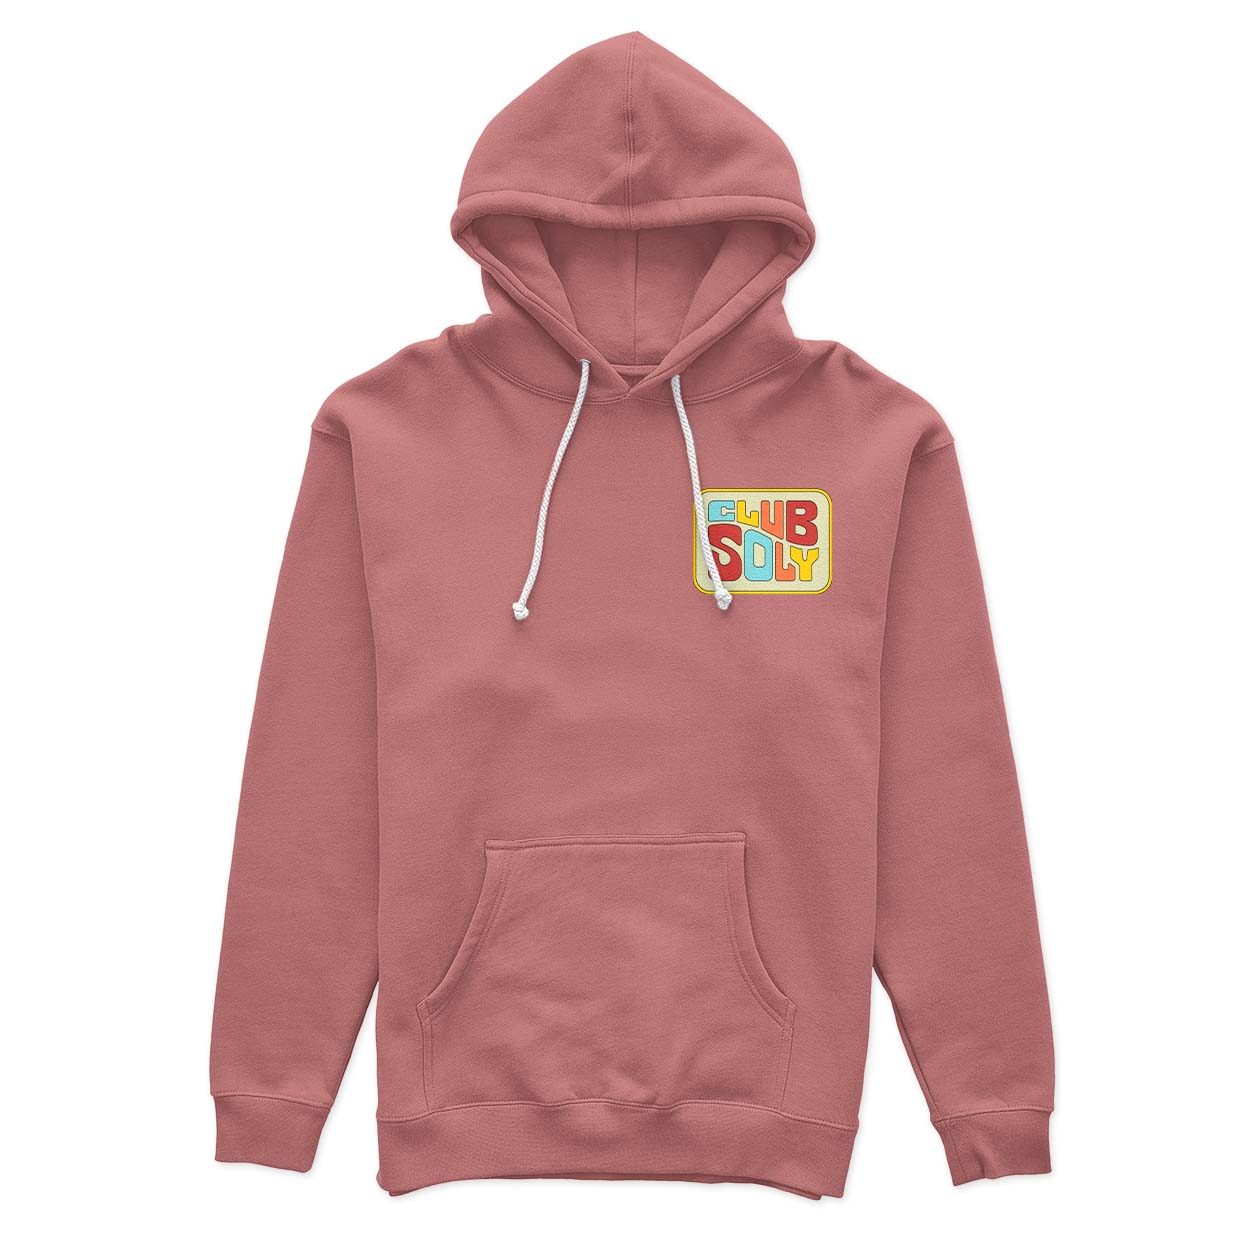 CLUB SOLY hoodie unisexe rose - tamelo boutique